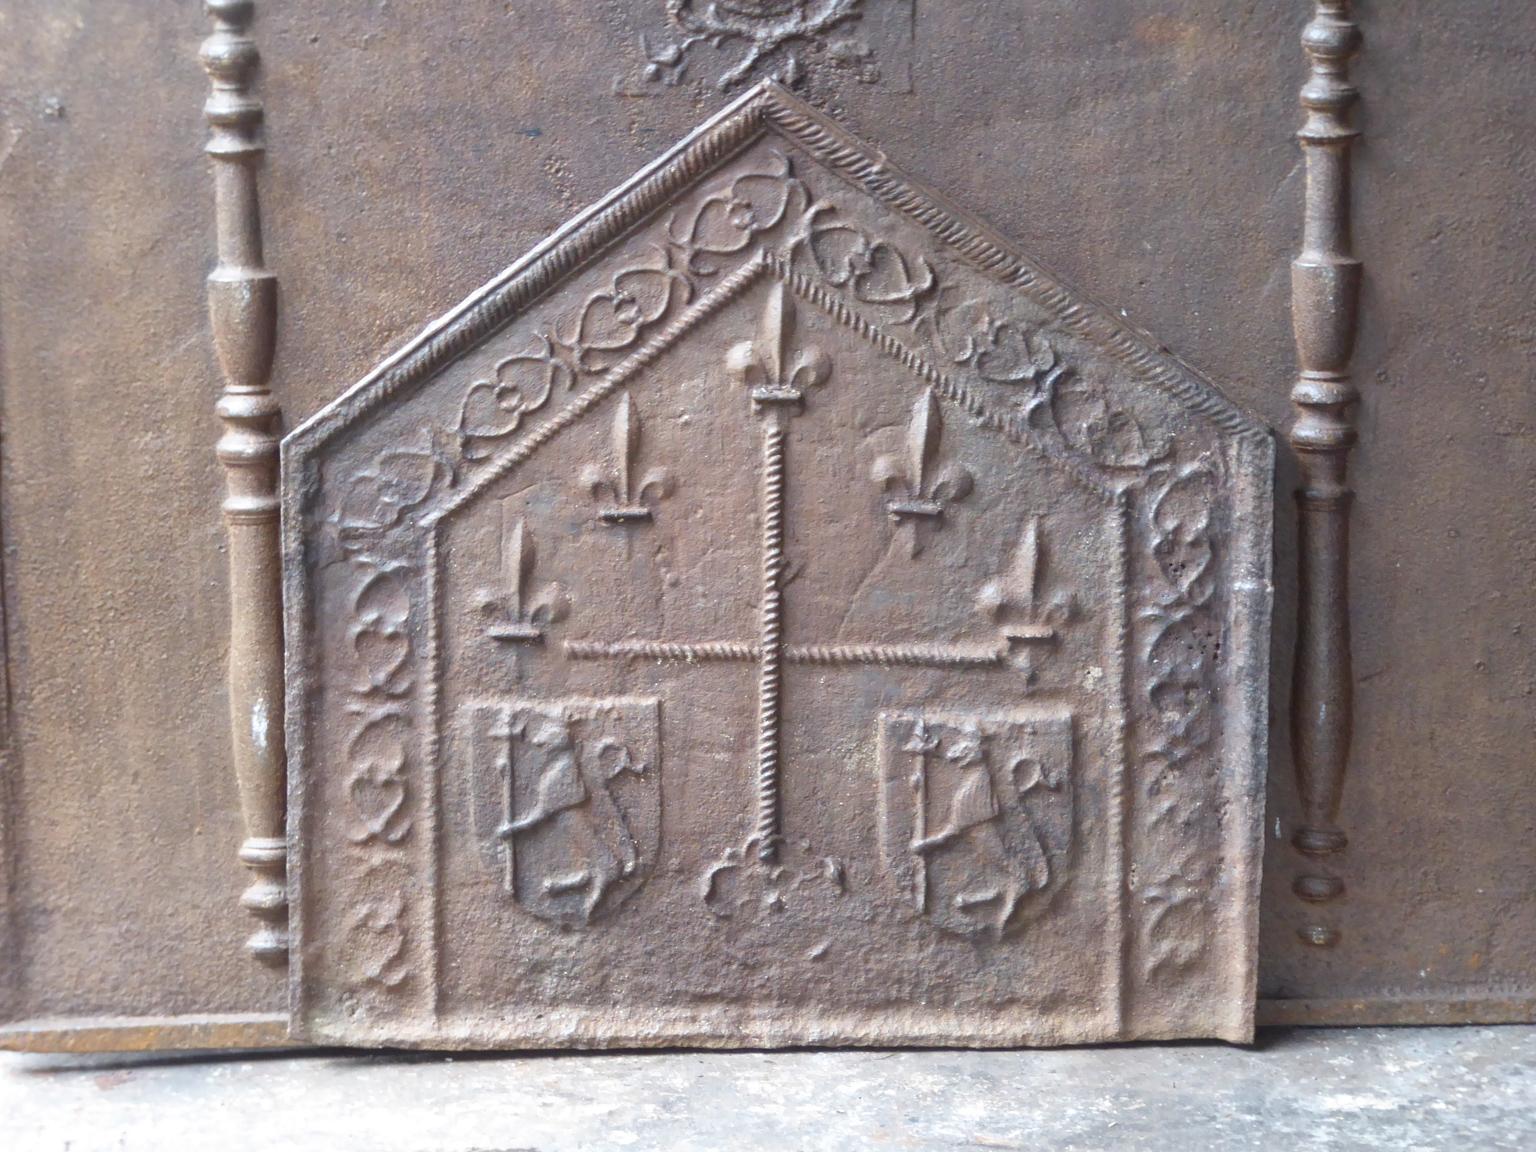 16th century French Gothic fireback from the early days of casting firebacks. Fireback with a cross confined by two unknown coats of arms and some trireschs (symbolizing the Holy Trinity, the probable precursor of the Fleur de Lys)

The fireback